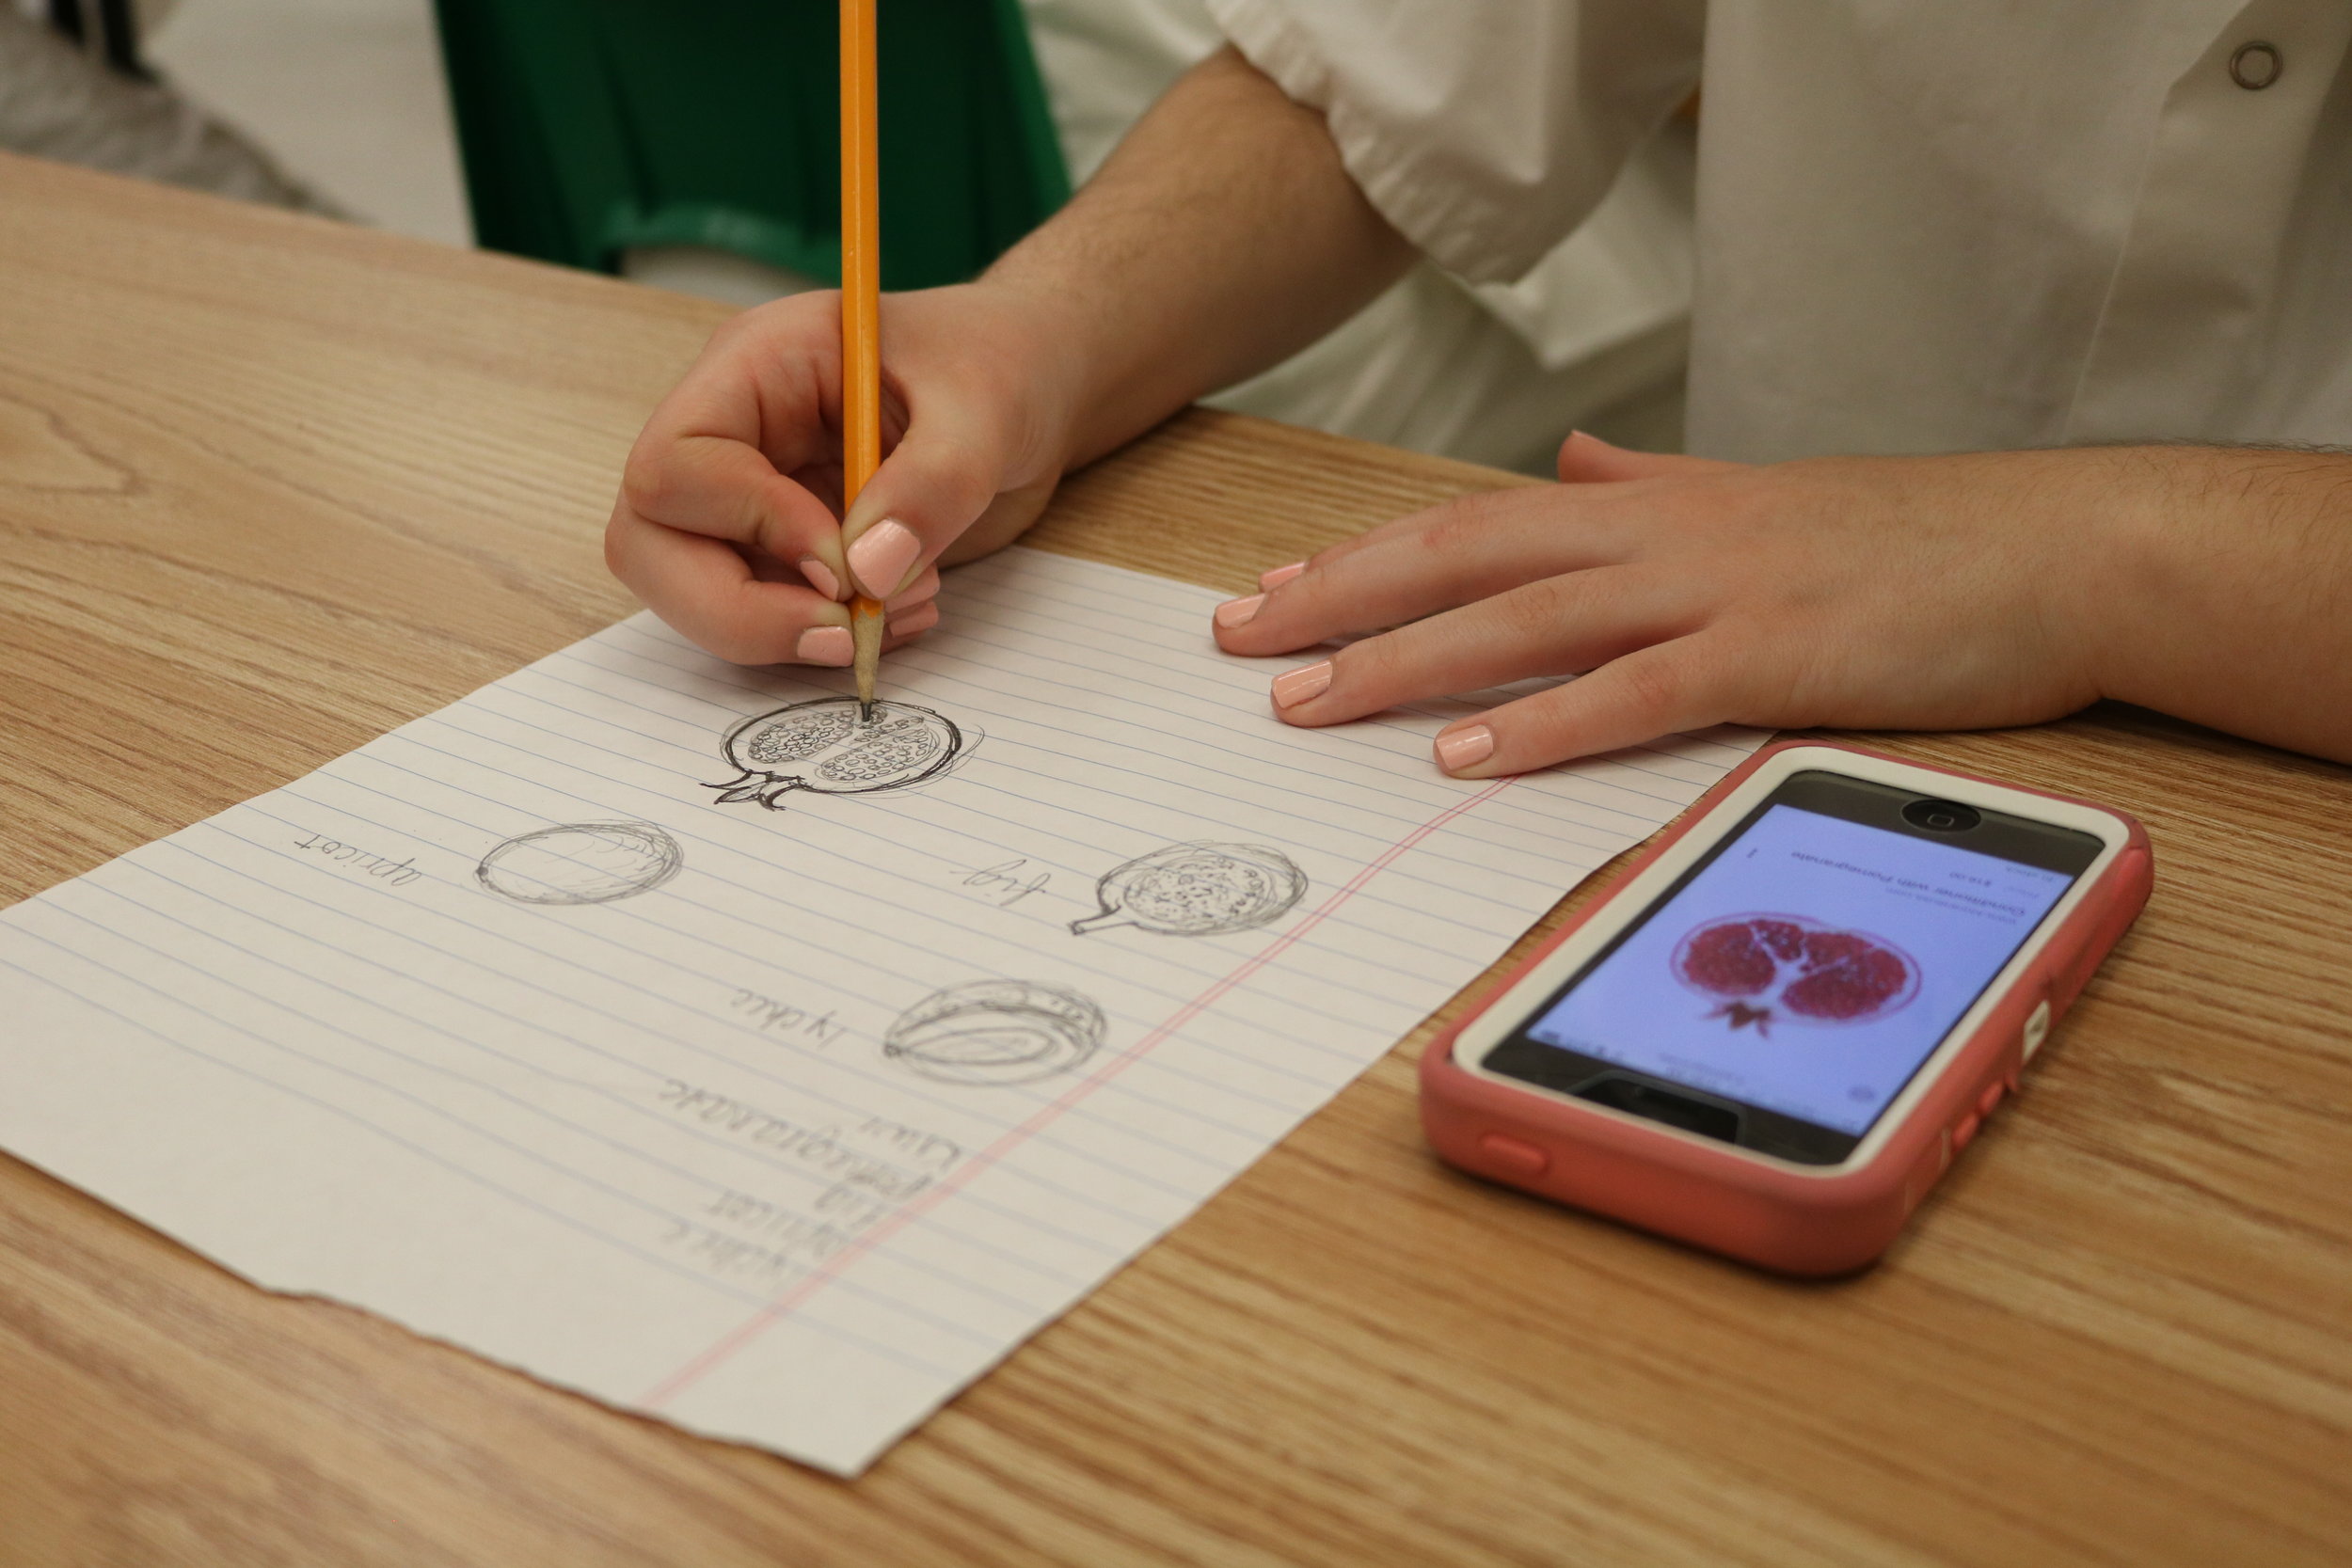   Ally Berrich, 17, sketches a pomegranate before she works on a marzipan project in her baking and pastry course at the Center of Applied Technology North in Severn, Md., on May 5, 2016.  